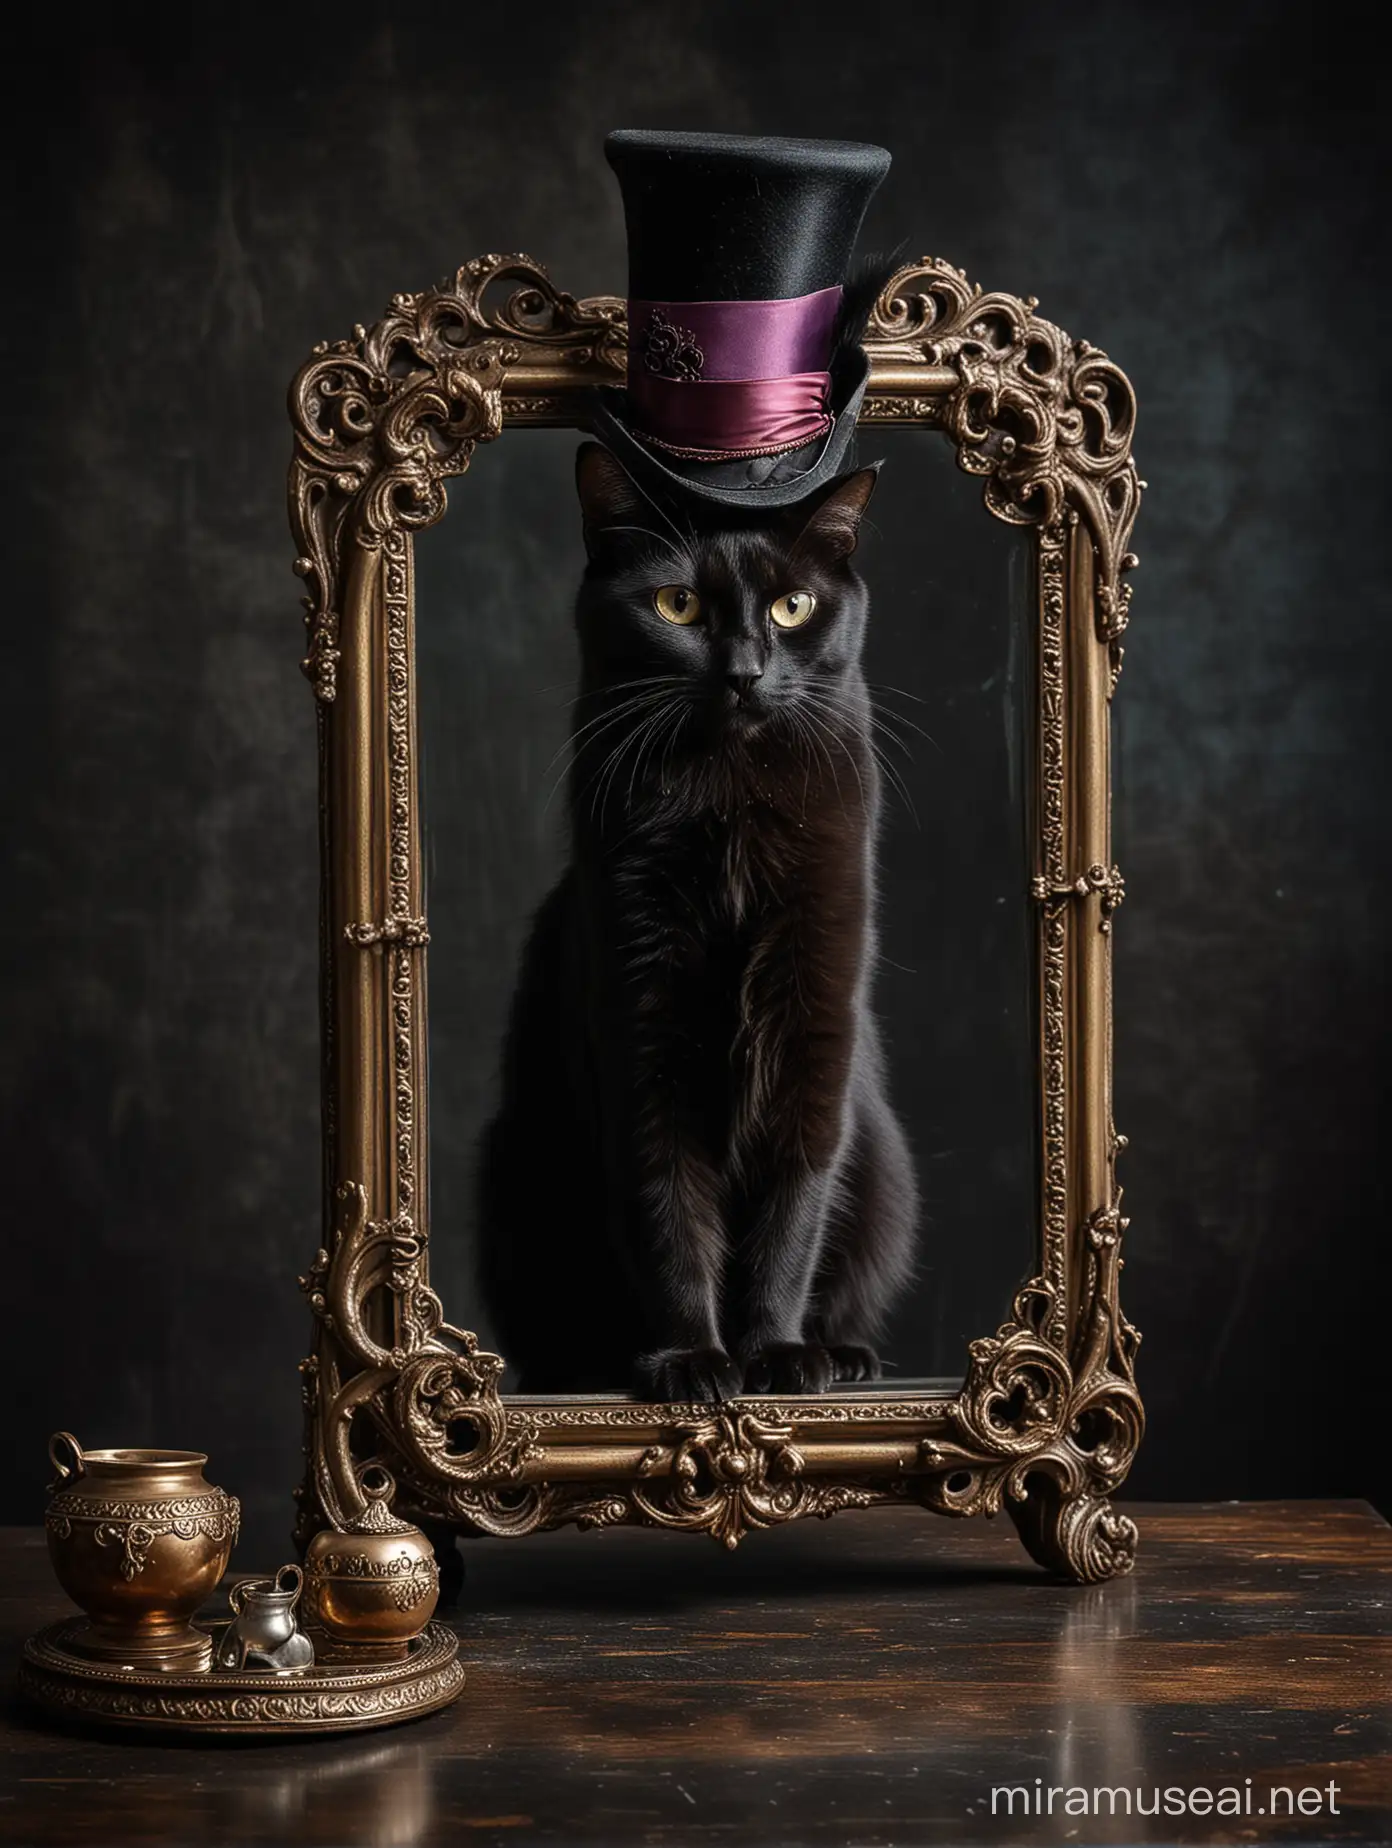 A studio portrait of  a black cat on a glass table, with a dark background. The cat is looking into an ornate mirror, contemplating entry into a parallel universe through the mirror which happens to be on the theme of Alice in Wonderland, specifically the Mad Hatters tea party. There must be props that indicate the mad hatters tea party. Hats and teacups etc....all very steampunk in style. 


